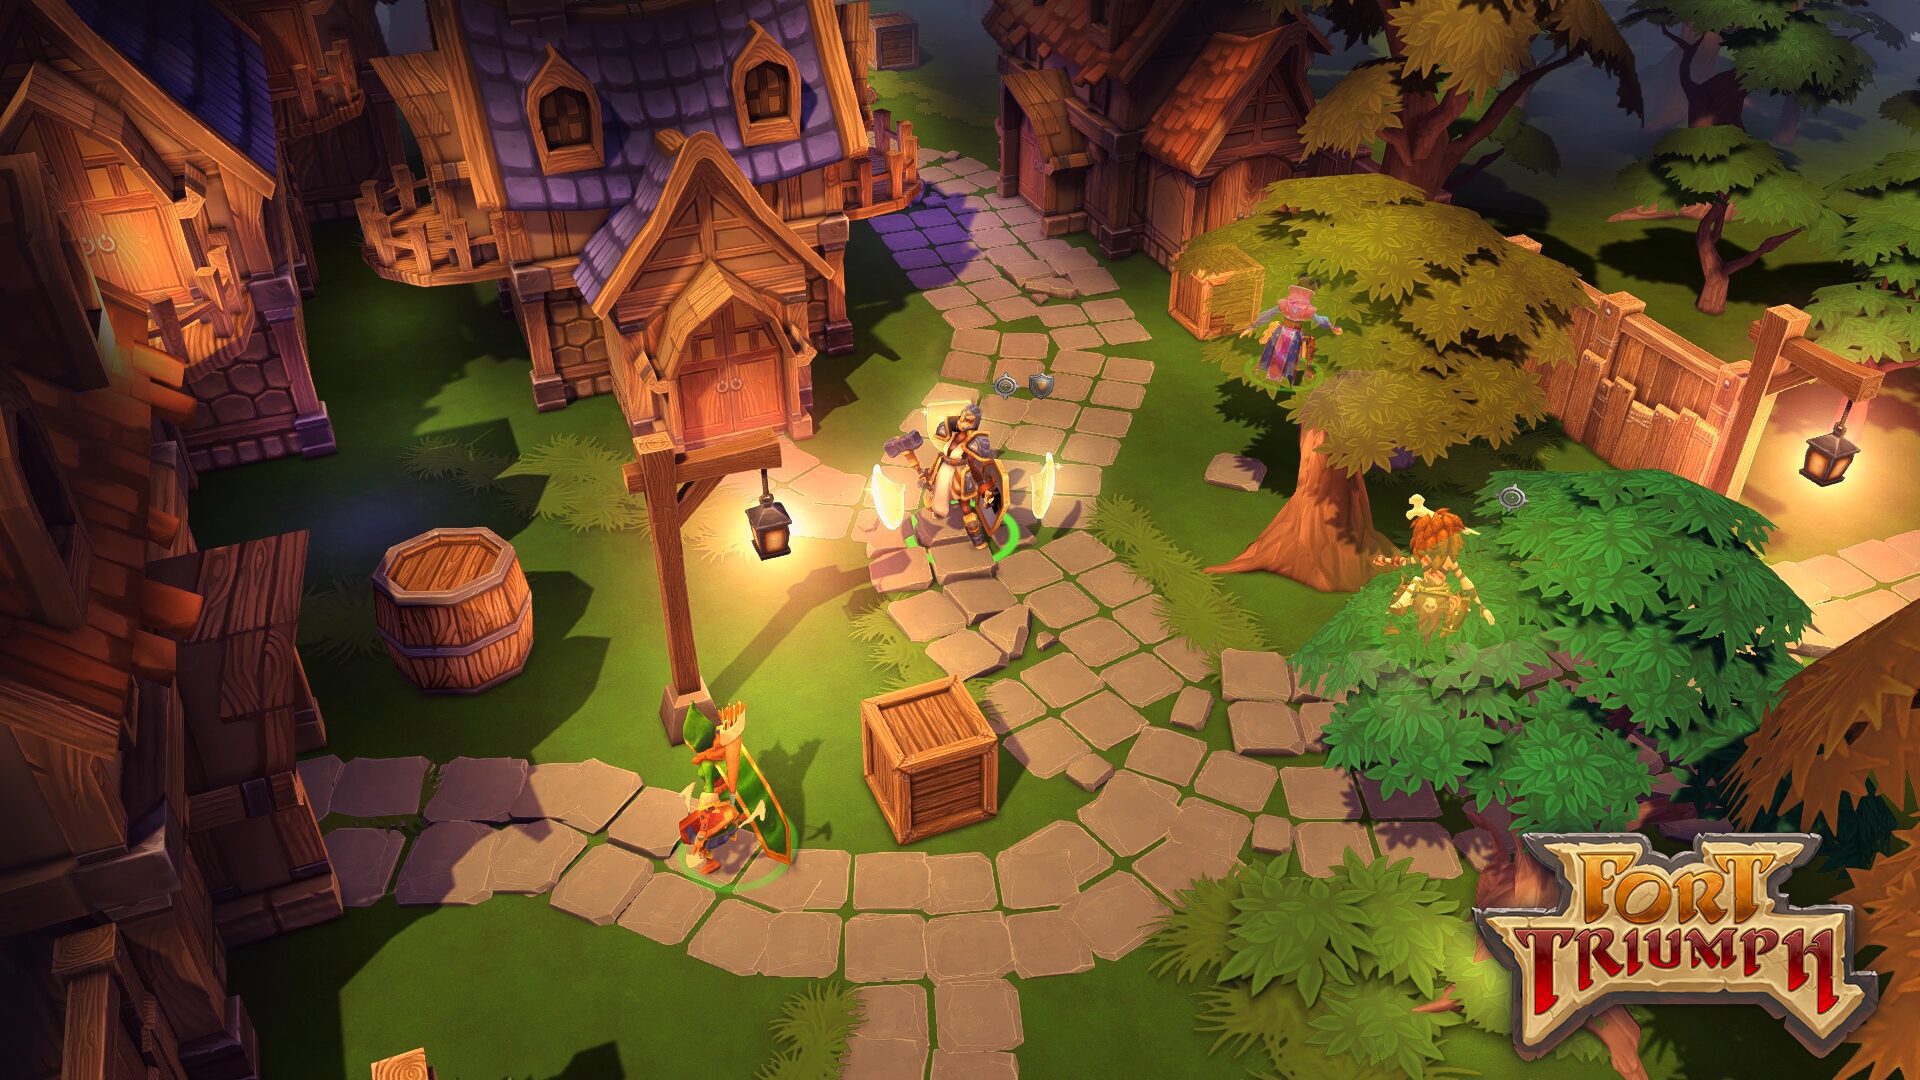 Turn-based tactical RPG ‘Fort Triumph’ hits early access next week